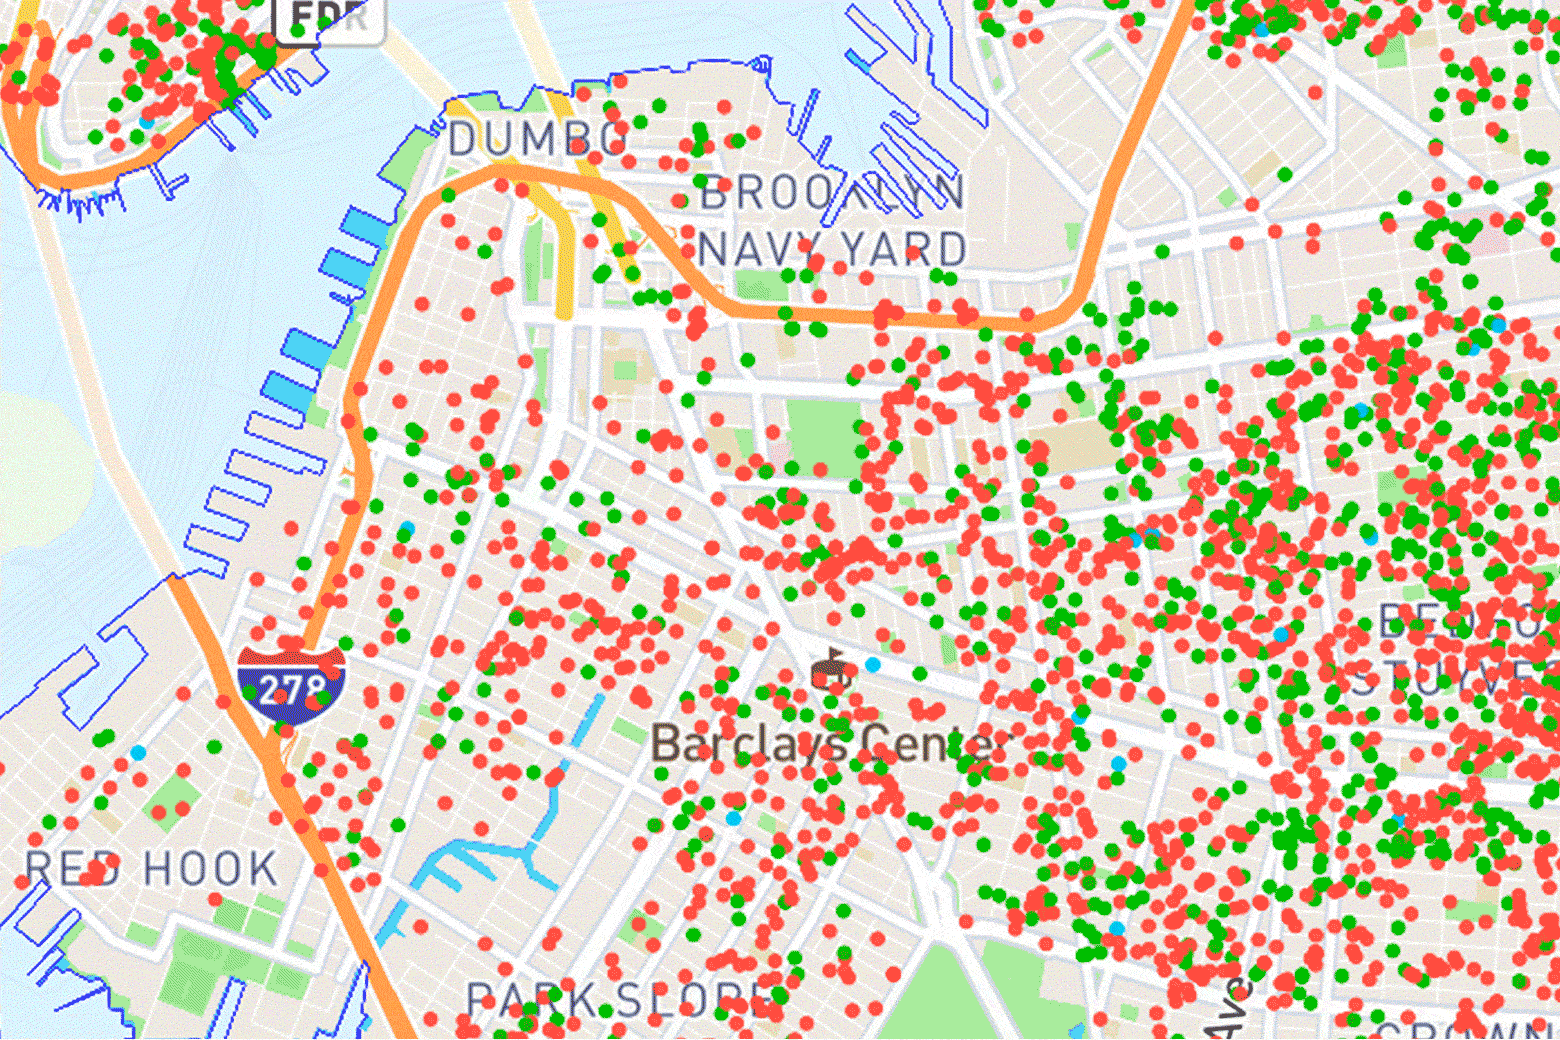 Just How Over Is NYC Airbnb? These Maps Give a Good Preview. Heather Tal Murphy